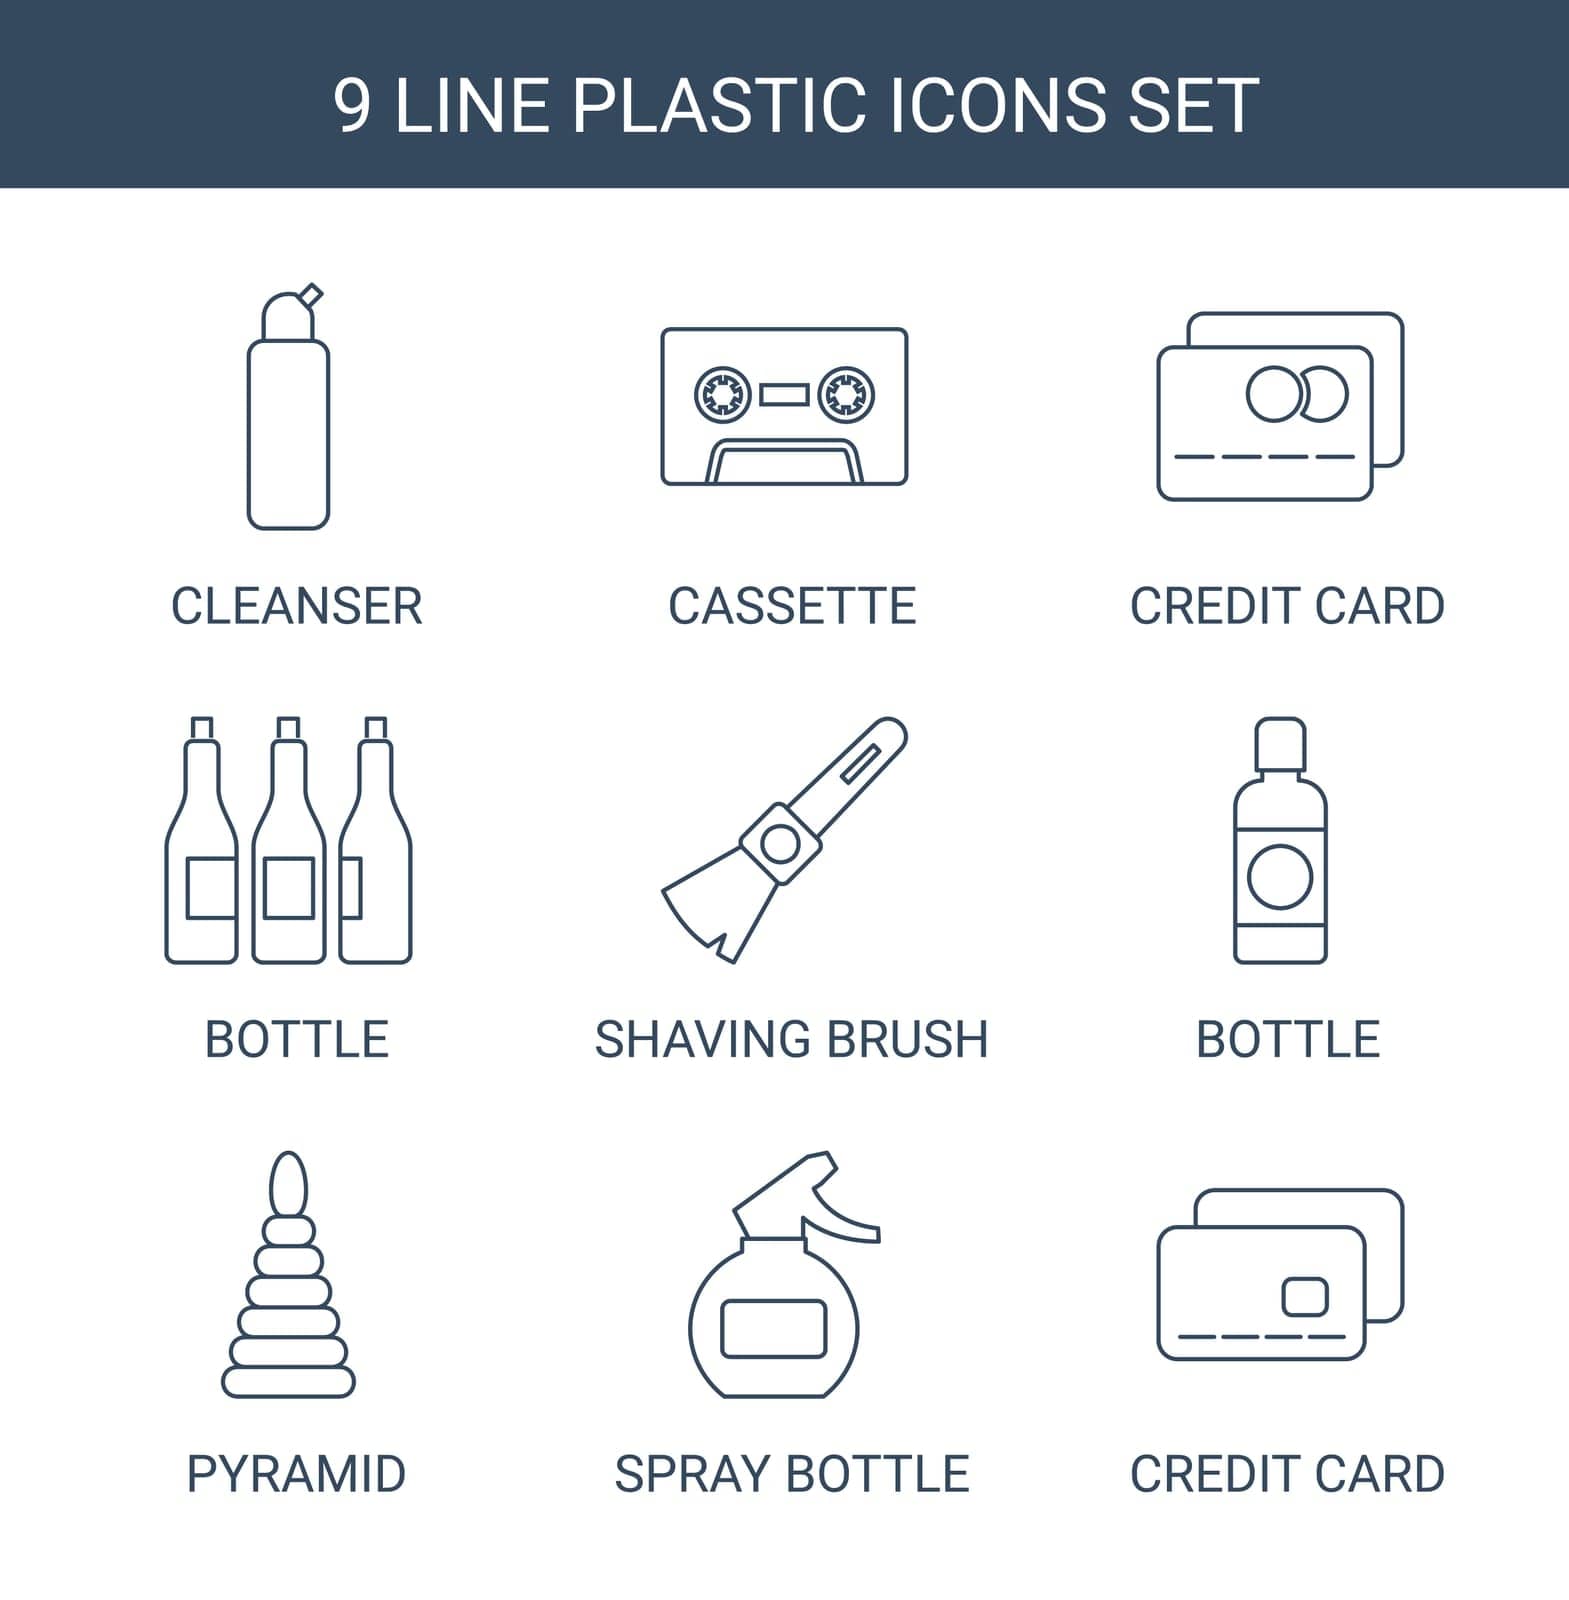 container,symbol,icon,sign,isolated,bottle,cassette,retail,outline,bank,white,design,beverage,payment,vector,credit,debit,cash,graphic,beer,element,brush,glass,set,spray,shape,business,shaving,clean,water,drink,cleanser,plastic,liquid,background,vintage,silhouette,pyramid,illustration,card,object